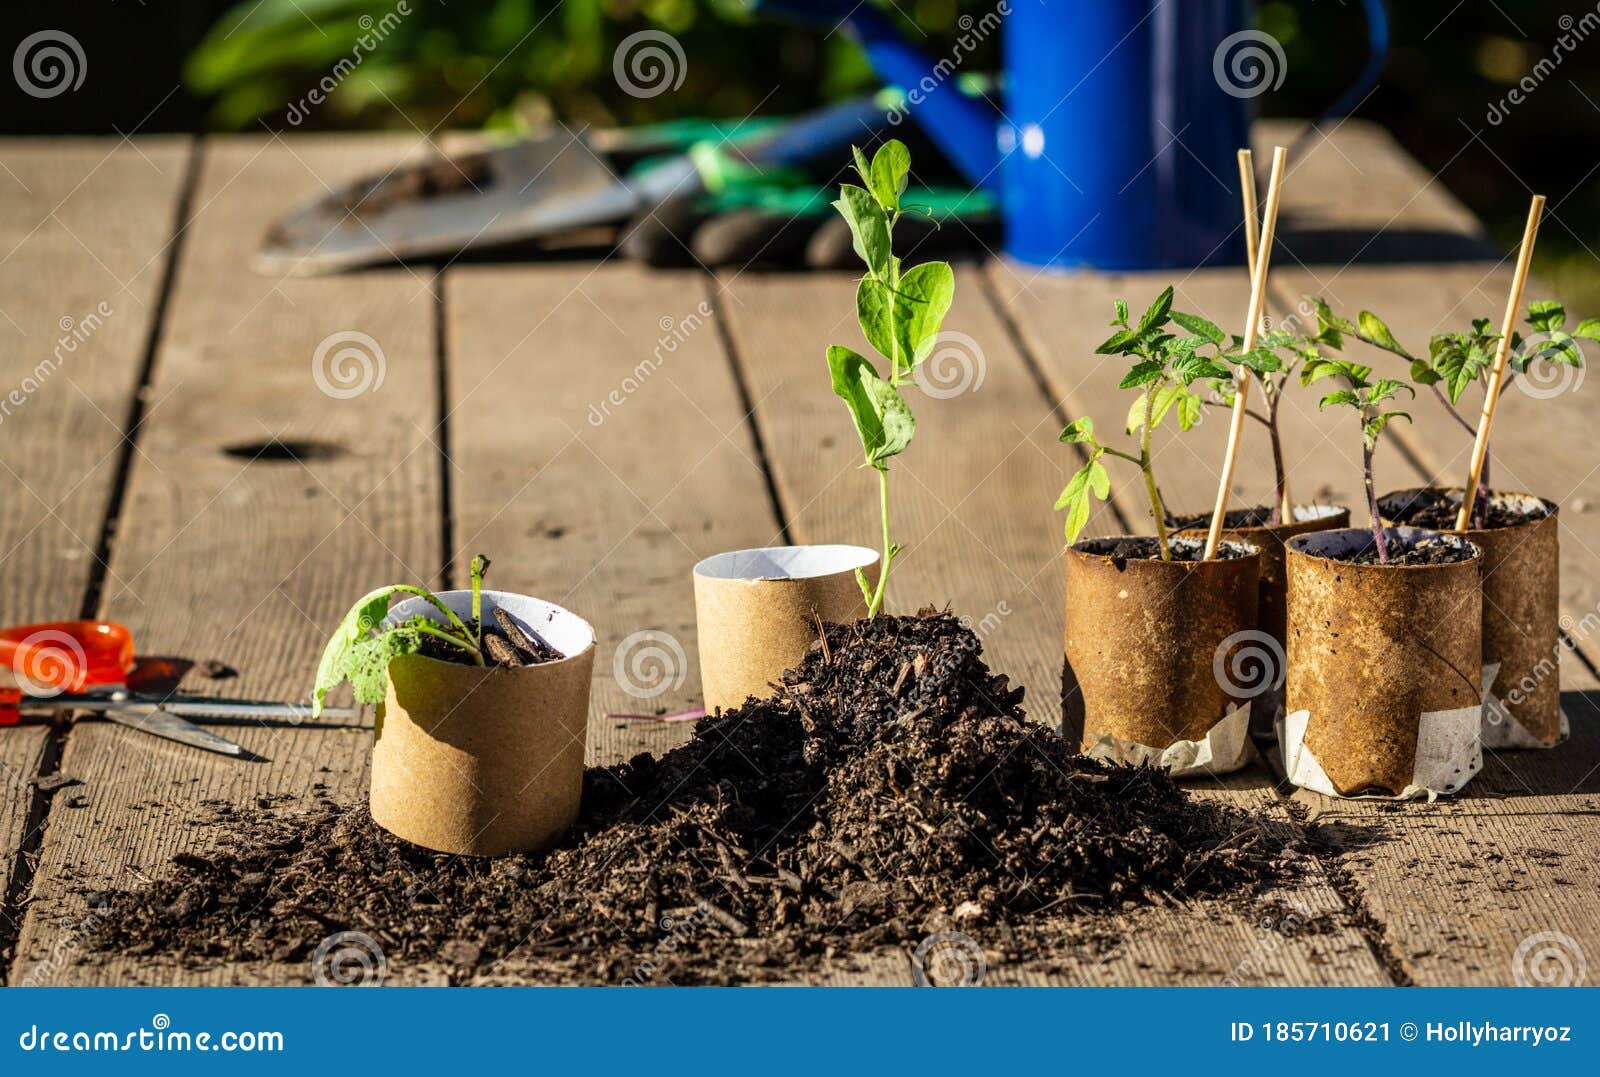 toilet paper roll recycled as a seedling planter, vegetable seedlings being potted into cardboard toilet paper rolls outside